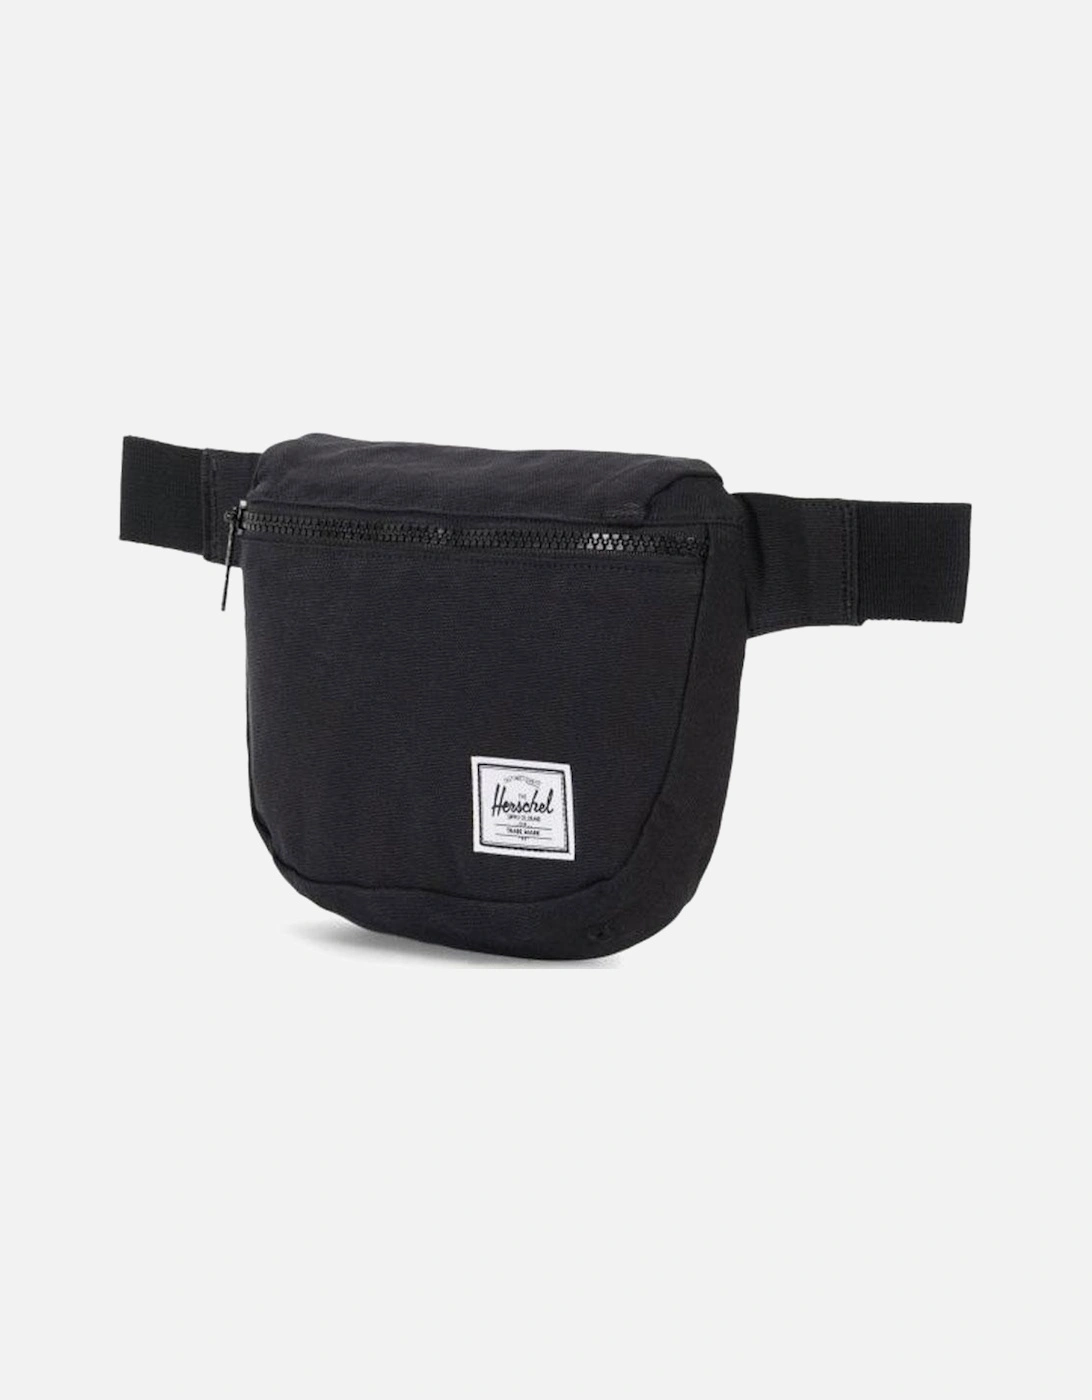 Supply Co - Fifteen Hip Pack Black - Cotton Casuals Collection